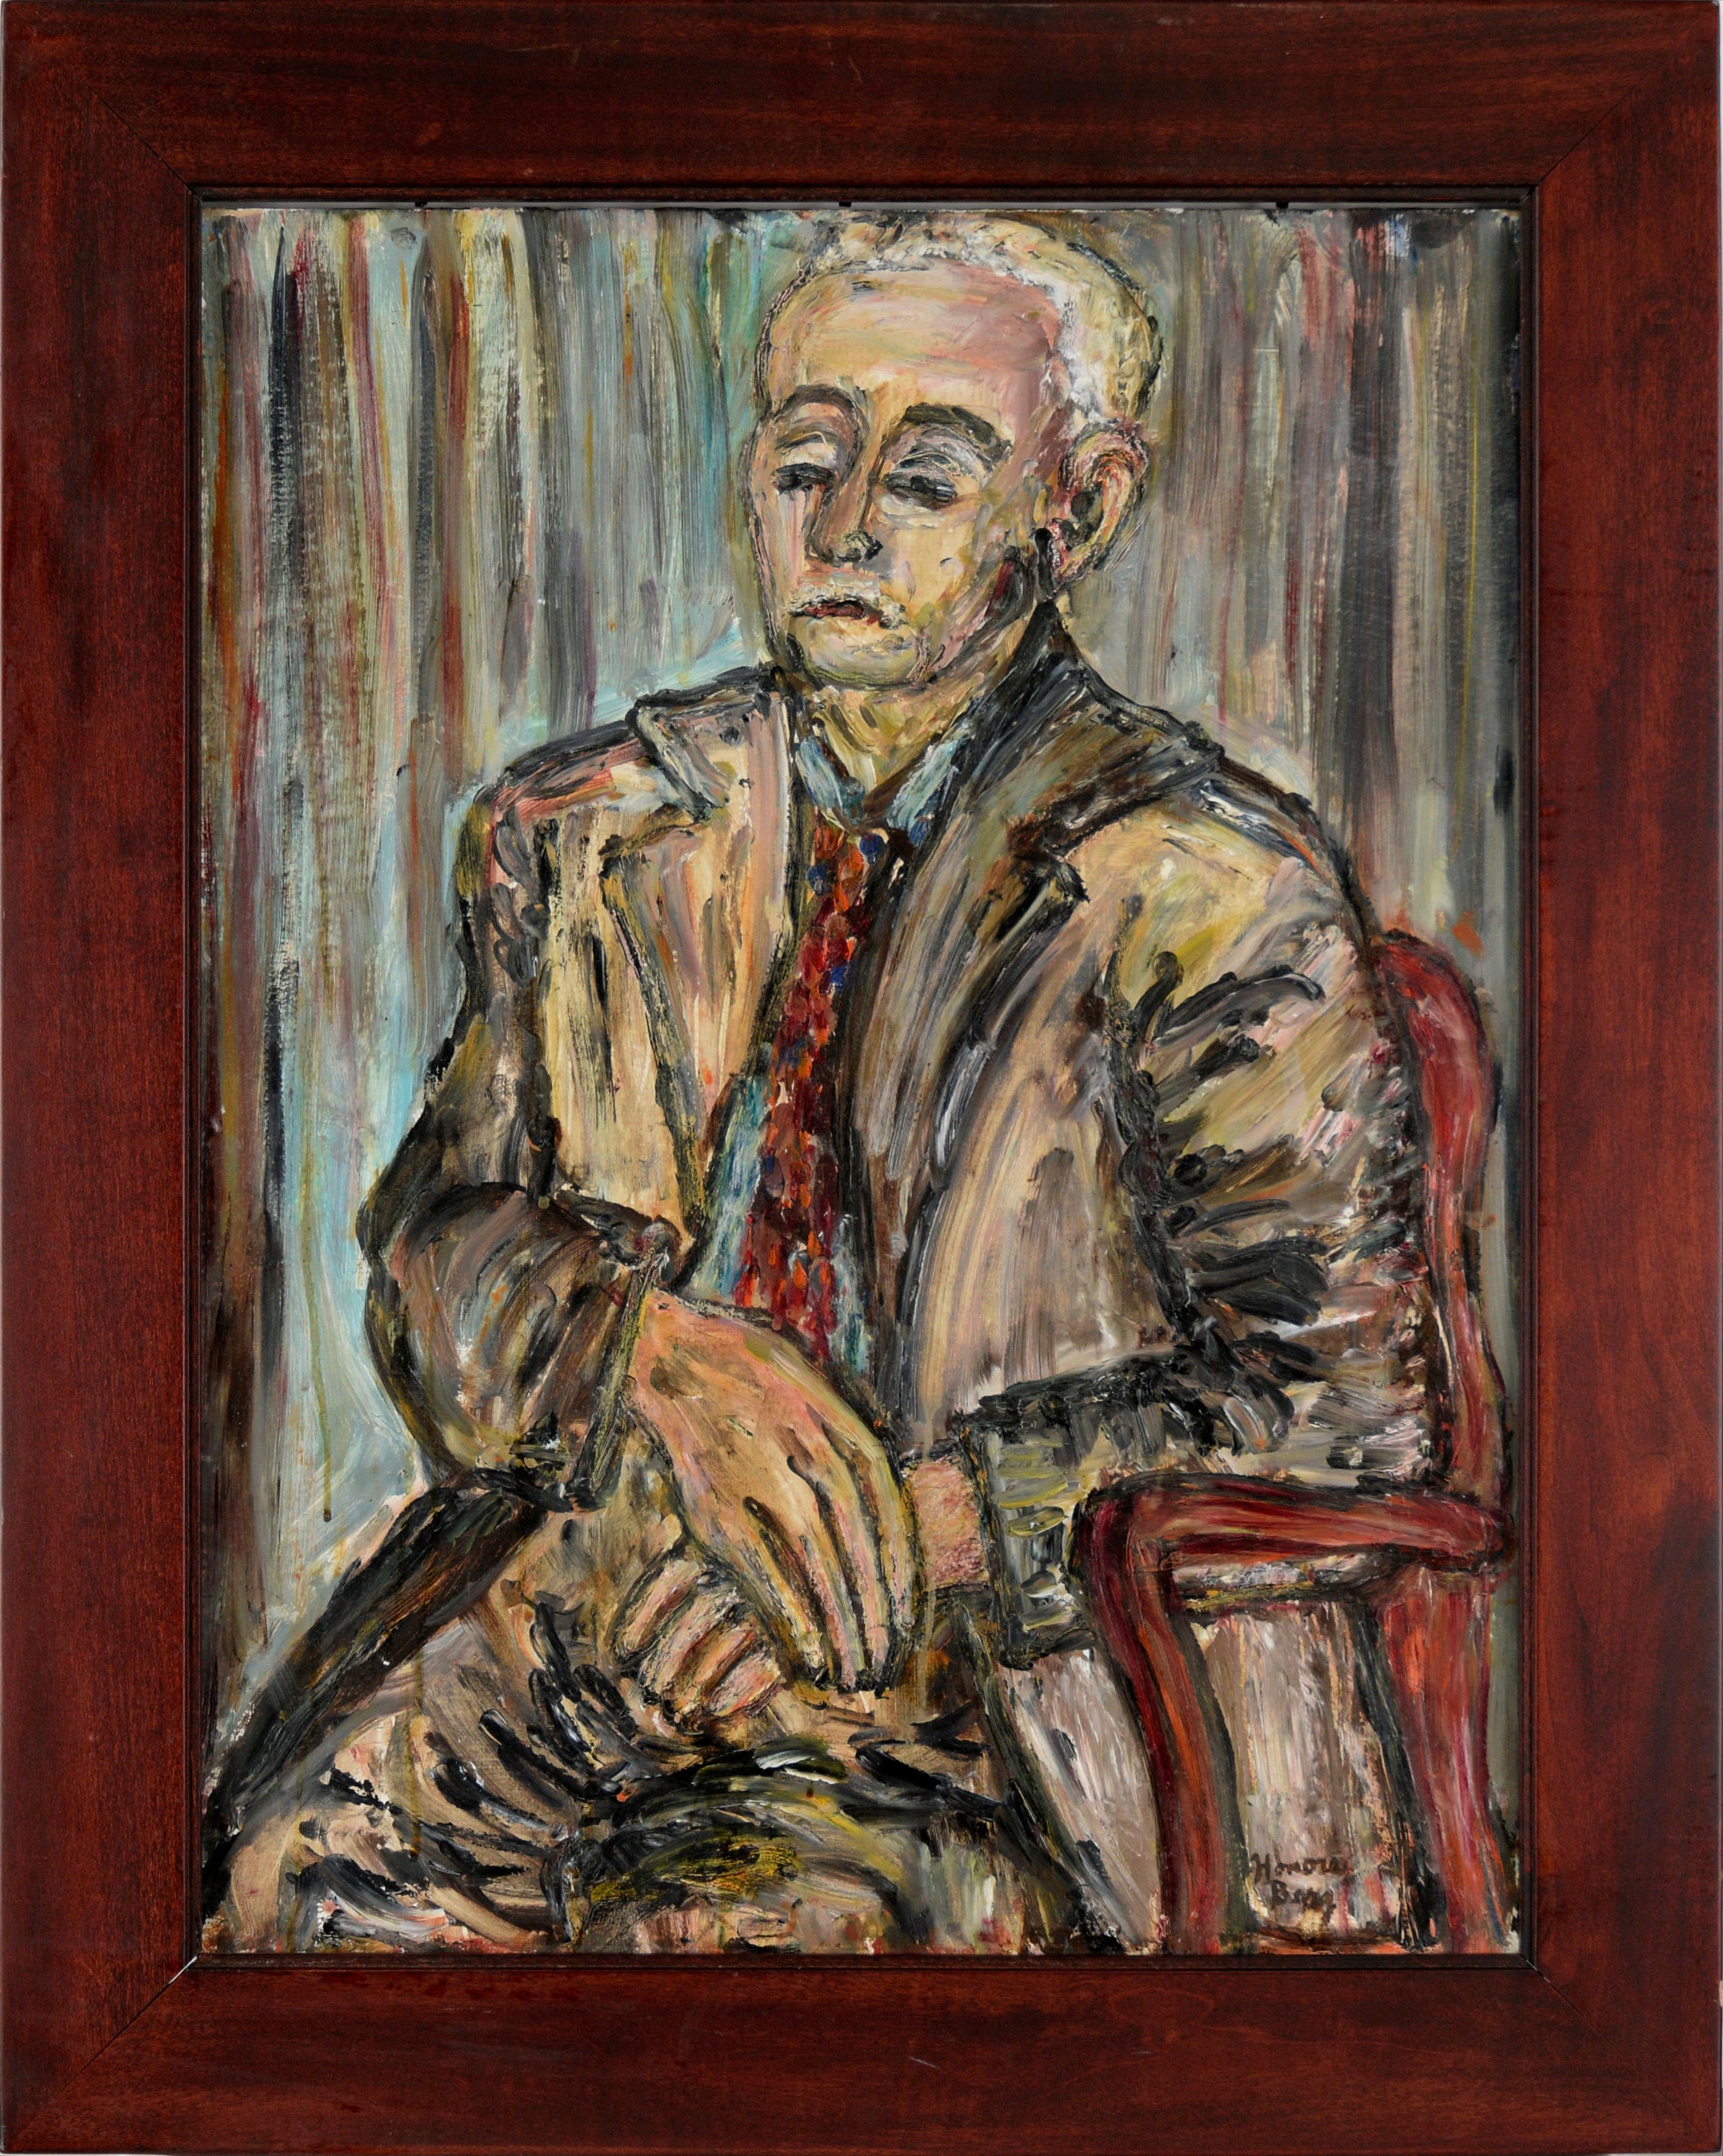 Honora Berg Portrait Painting - Mid Century Modern Portrait of a Man in a Suit in Oil on Masonite